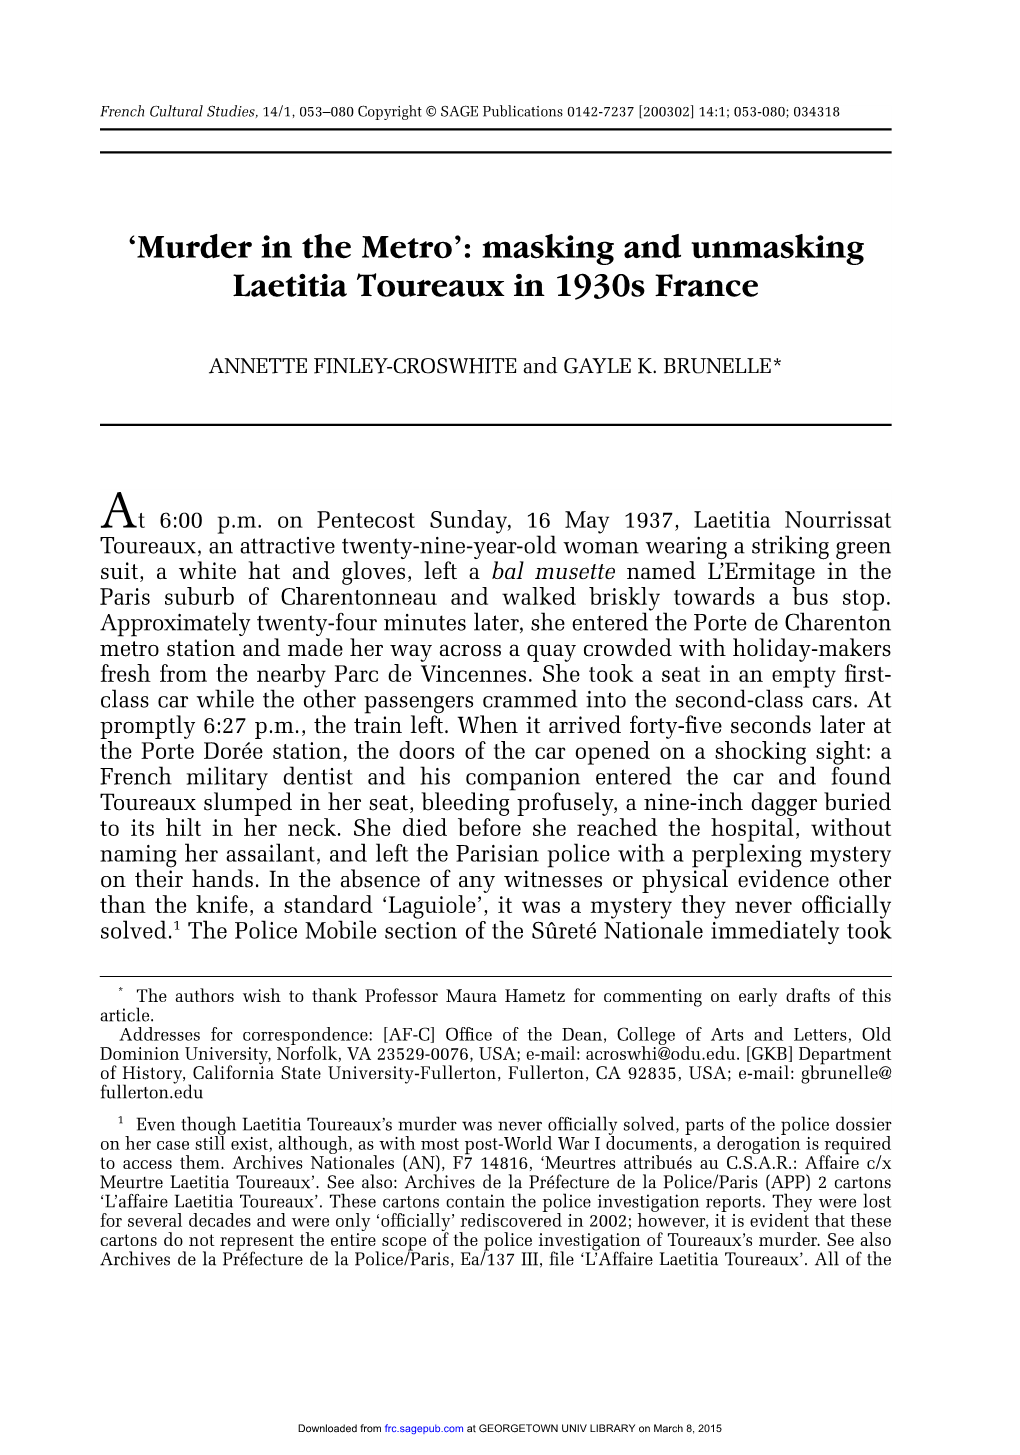 'Murder in the Metro': Masking and Unmasking Laetitia Toureaux in 1930S France